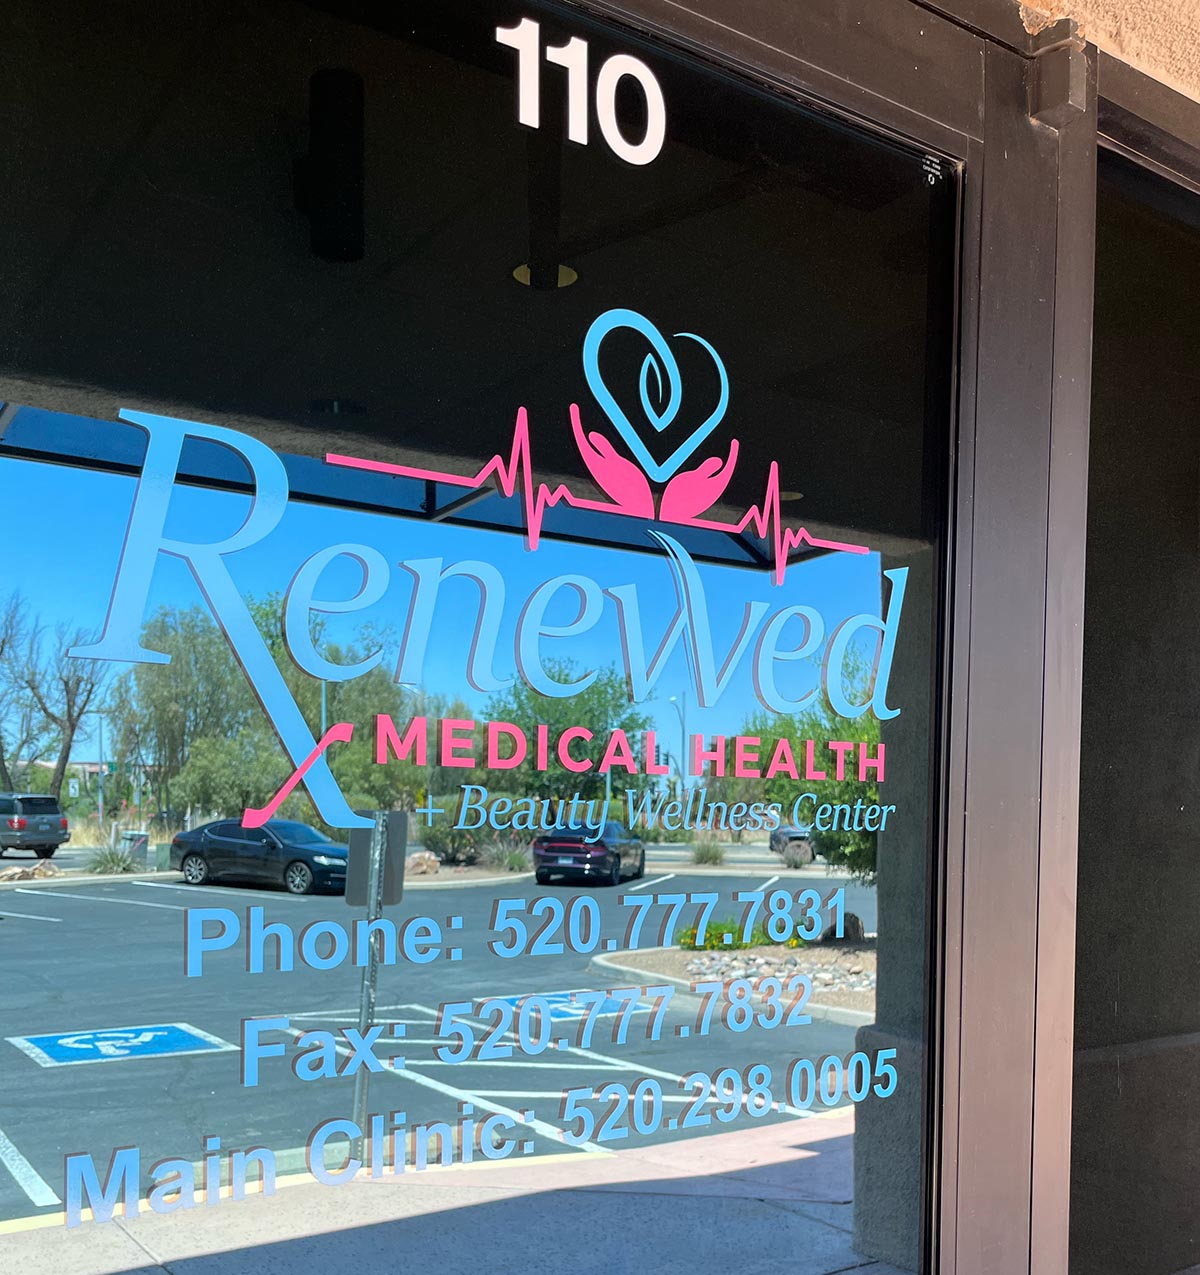 Renewed Medical Health and Beauty Green Valley Clinic Location Door